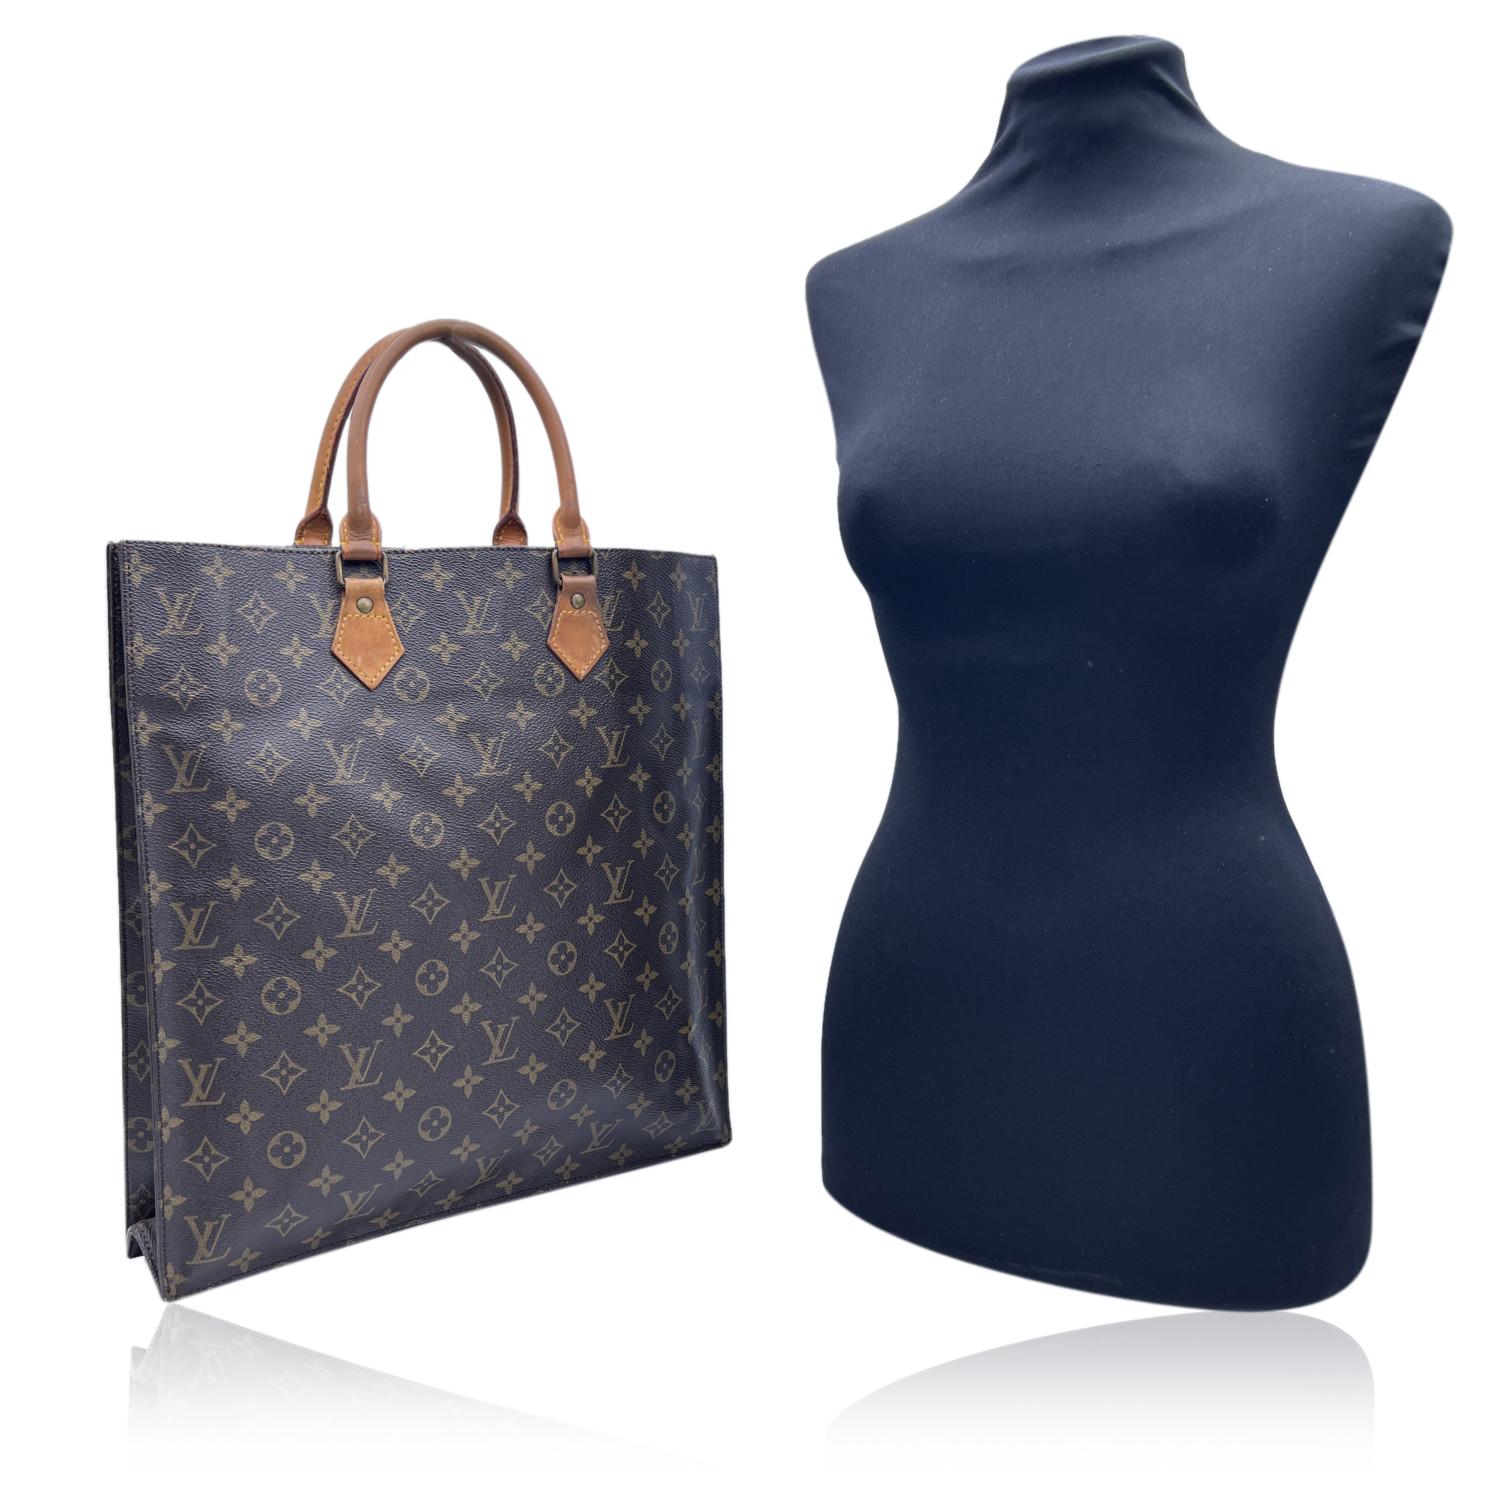 Vintage LOUIS VUITTON 'Sac Plat' tote bag in timeless monogram canvas. Rectangular box shape and open top. Double rounded leather top handles. Leather lining. 'LOUIS VUITTON - Made in France' tag inside. 'Made in France' and data code engraved on